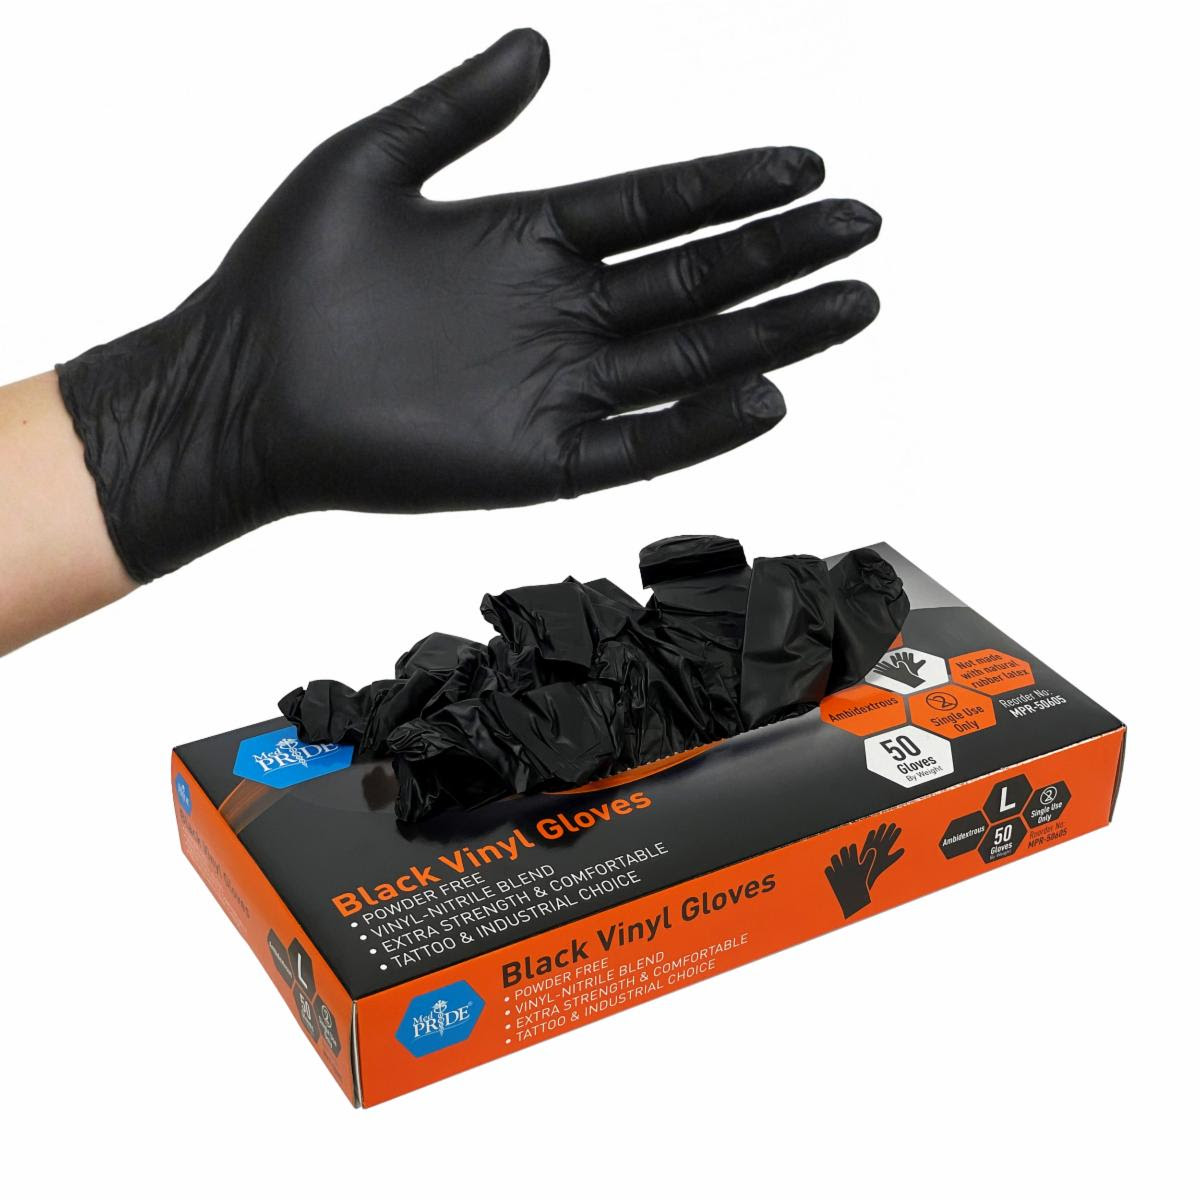 General Purpose Gloves Products, Supplies and Equipment